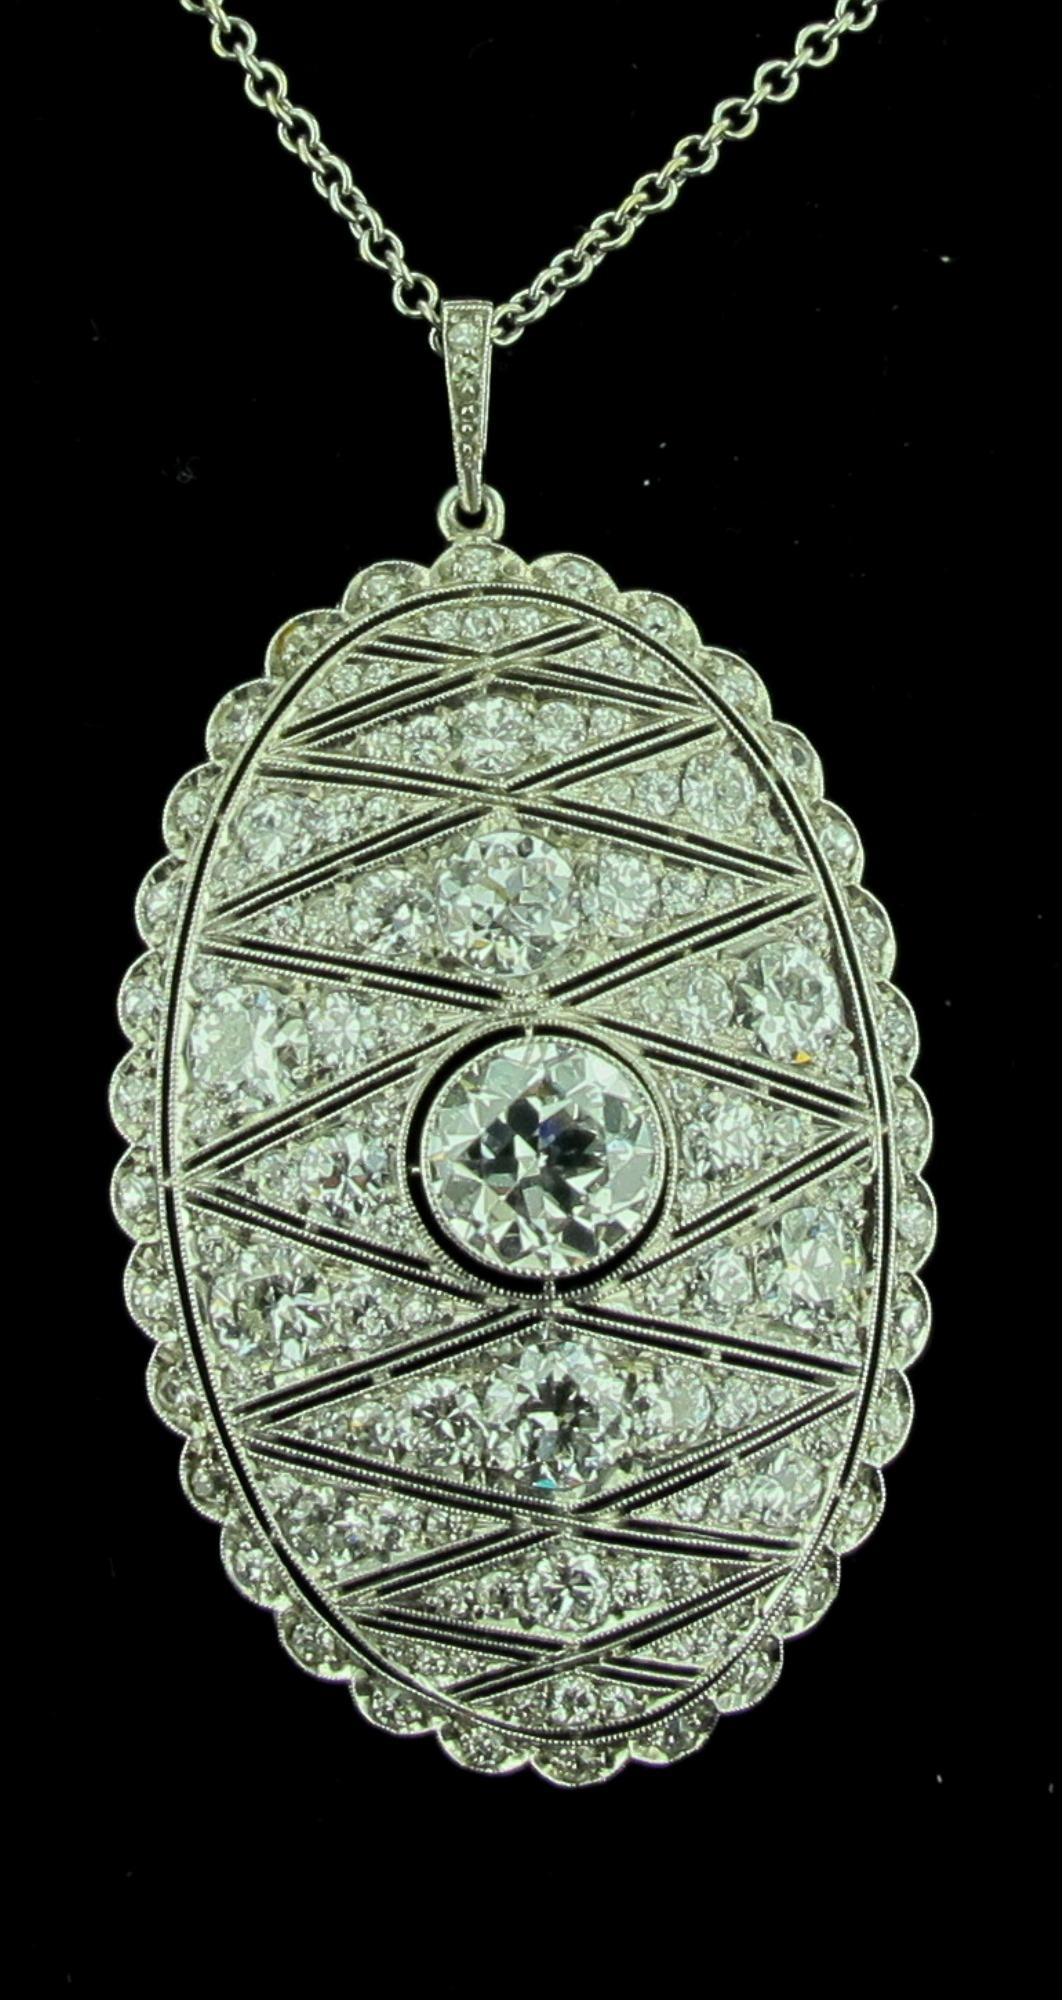 From the Art Deco period, circa 1925, is this diamond pendant set in Platinum.  The Center Diamond weighs 1.50 carats.  Color is H, Clarity is VS.  The Oval Pendant is covered with round cut diamonds with a total diamond weight of 3.75 carats.